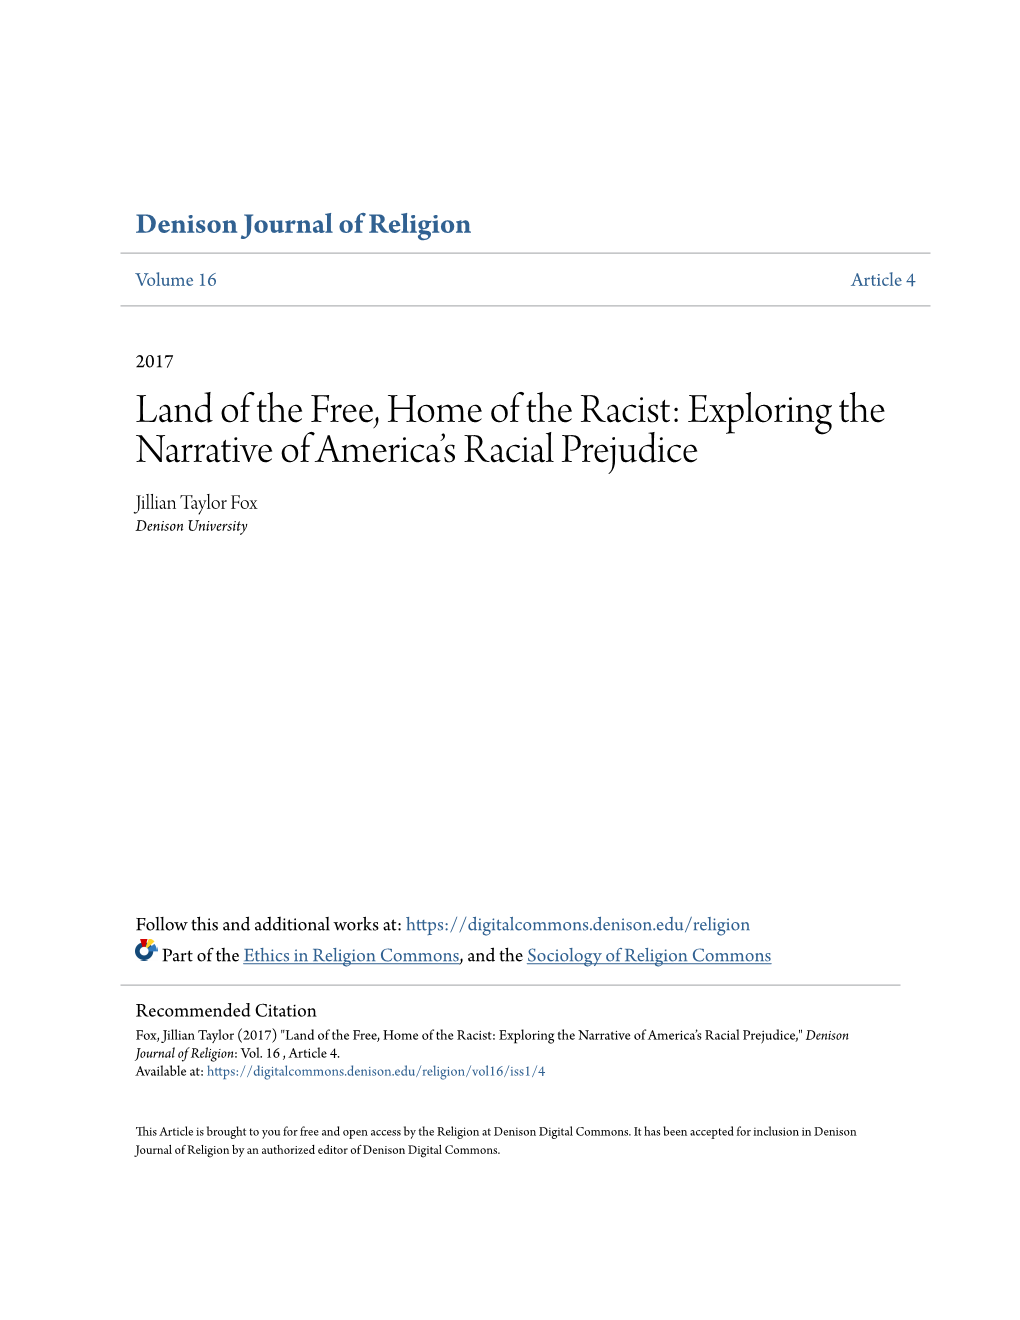 Land of the Free, Home of the Racist: Exploring the Narrative of Americaâ